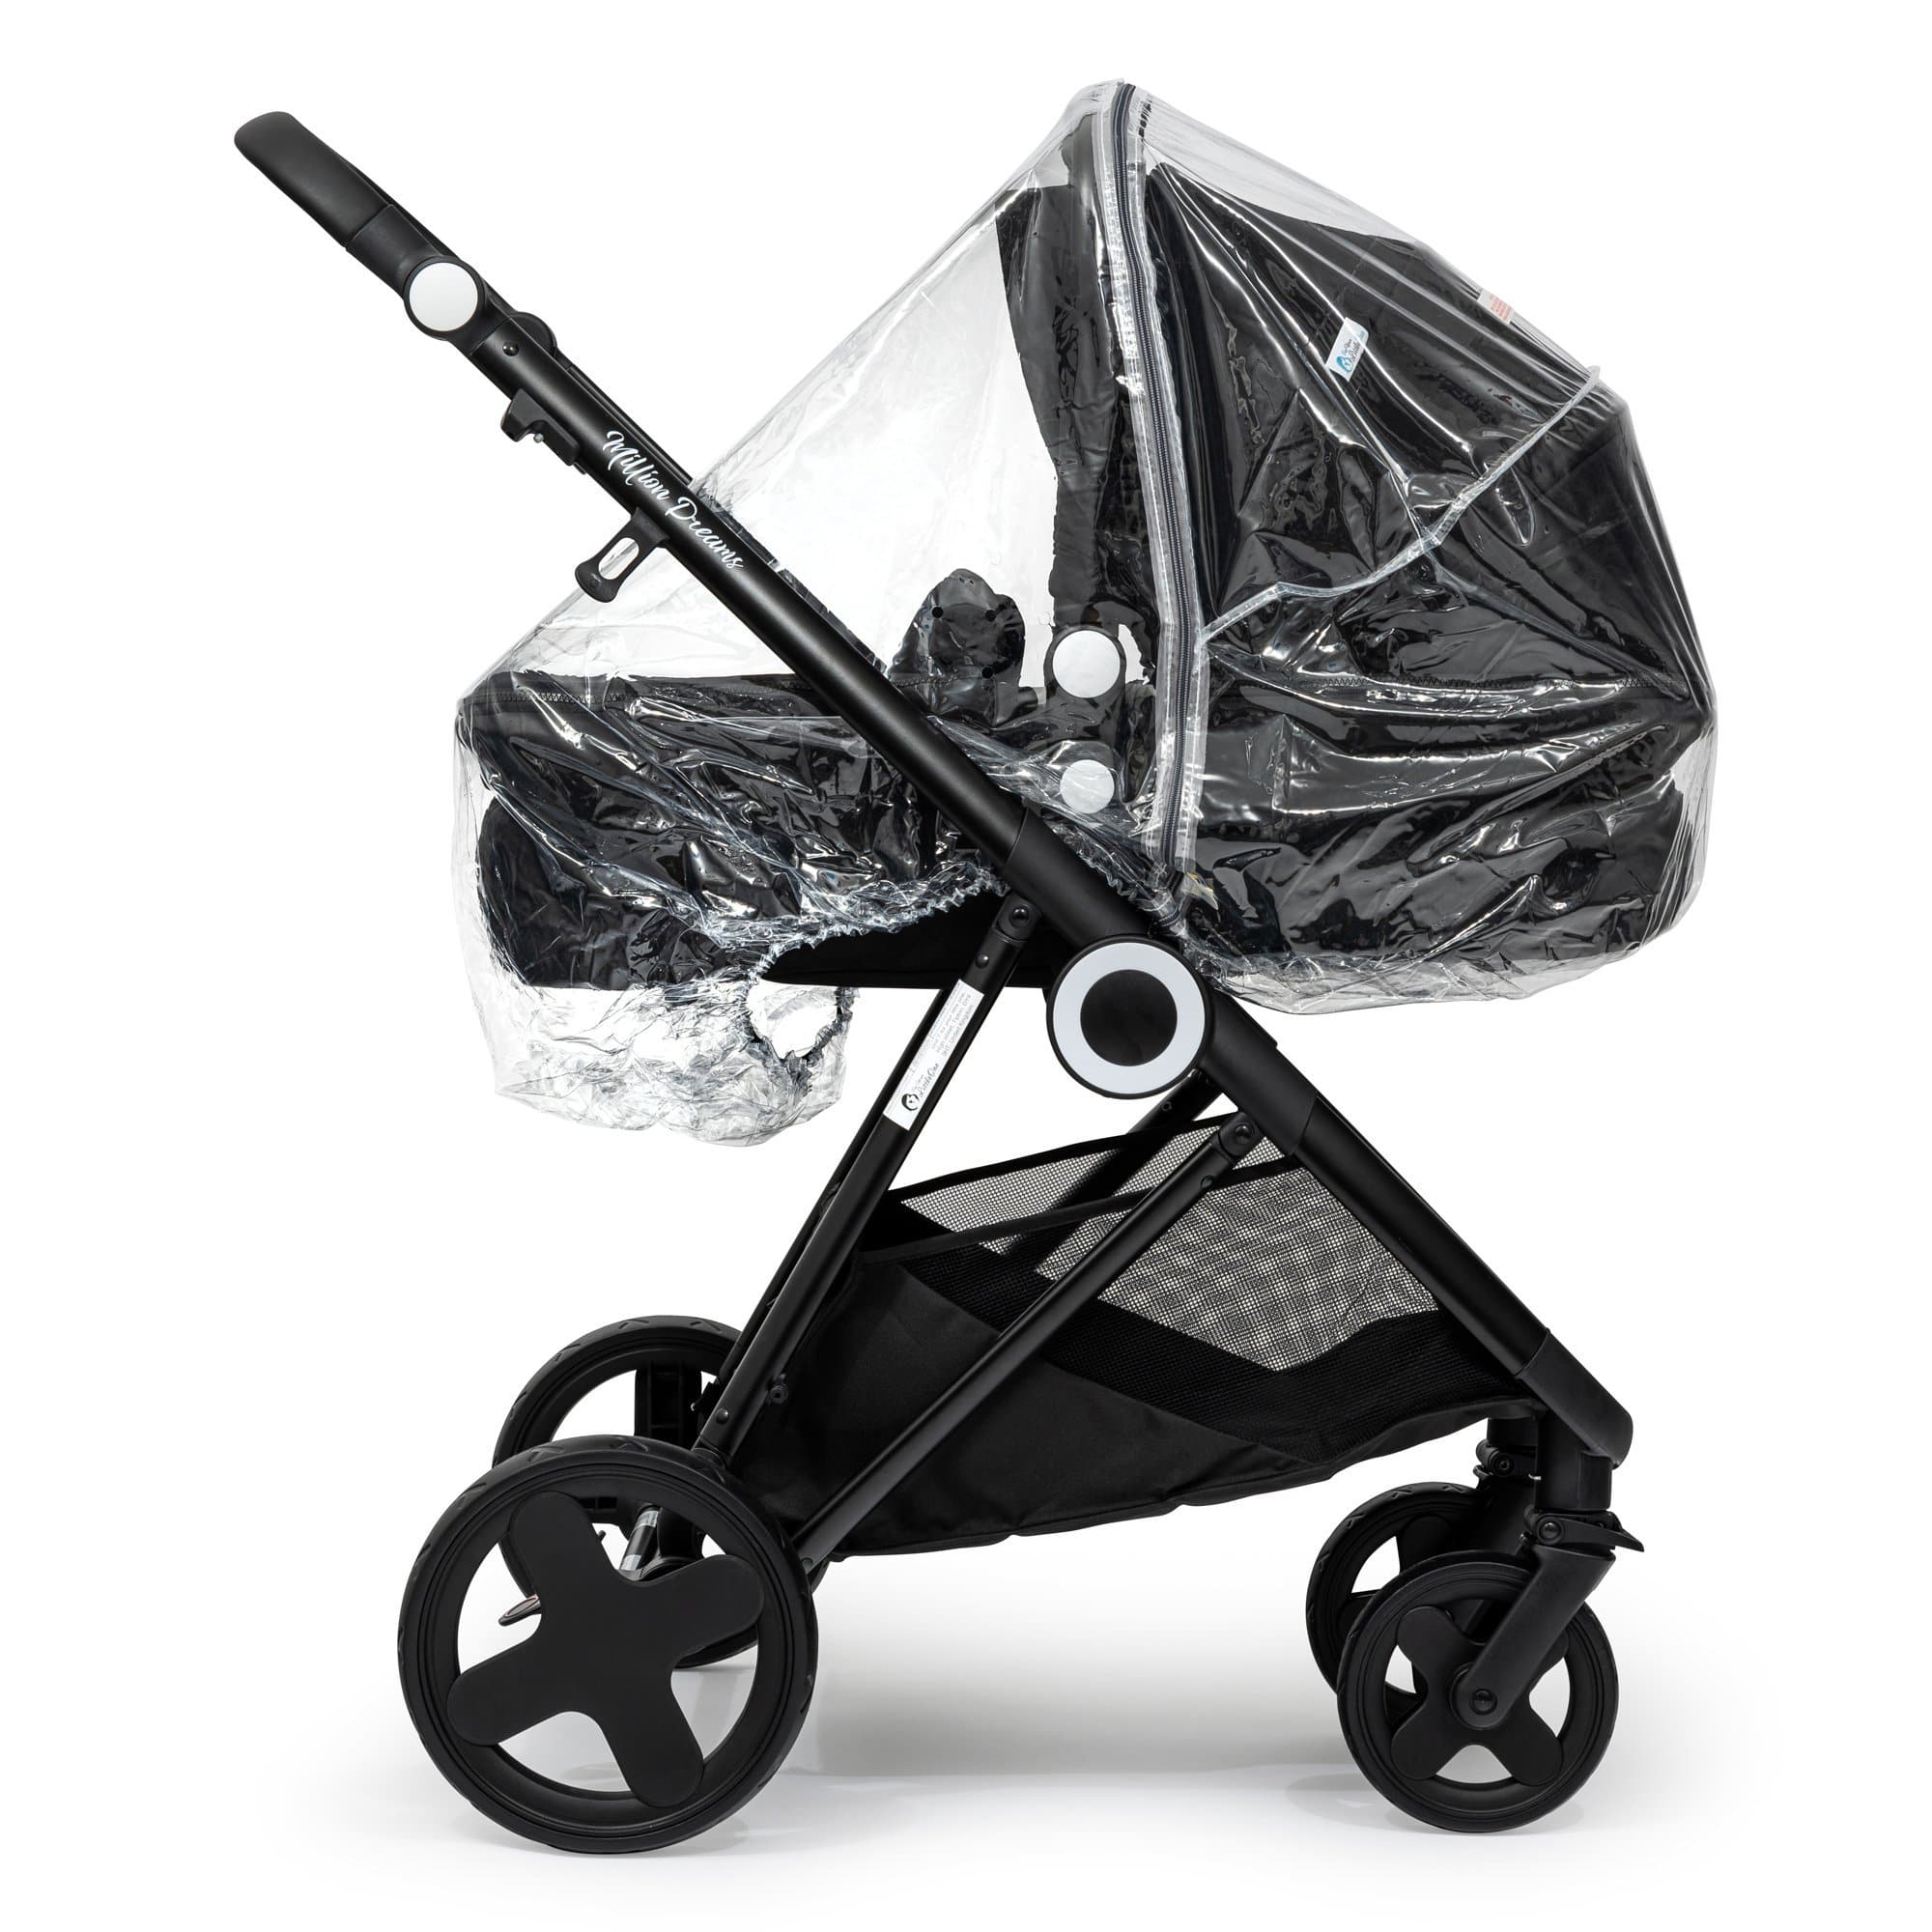 2 in 1 Rain Cover Compatible with Easywalker - Fits All Models - For Your Little One